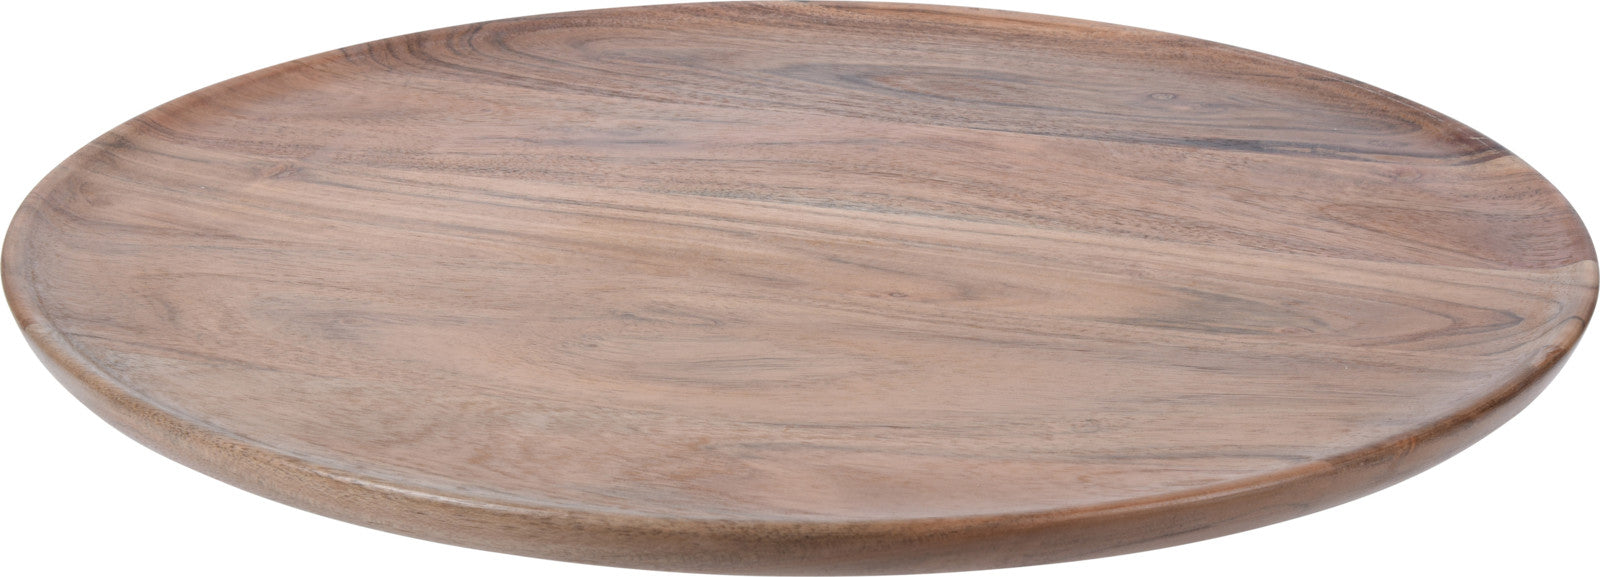 Candle Plate Round Acacia Wood 380mm